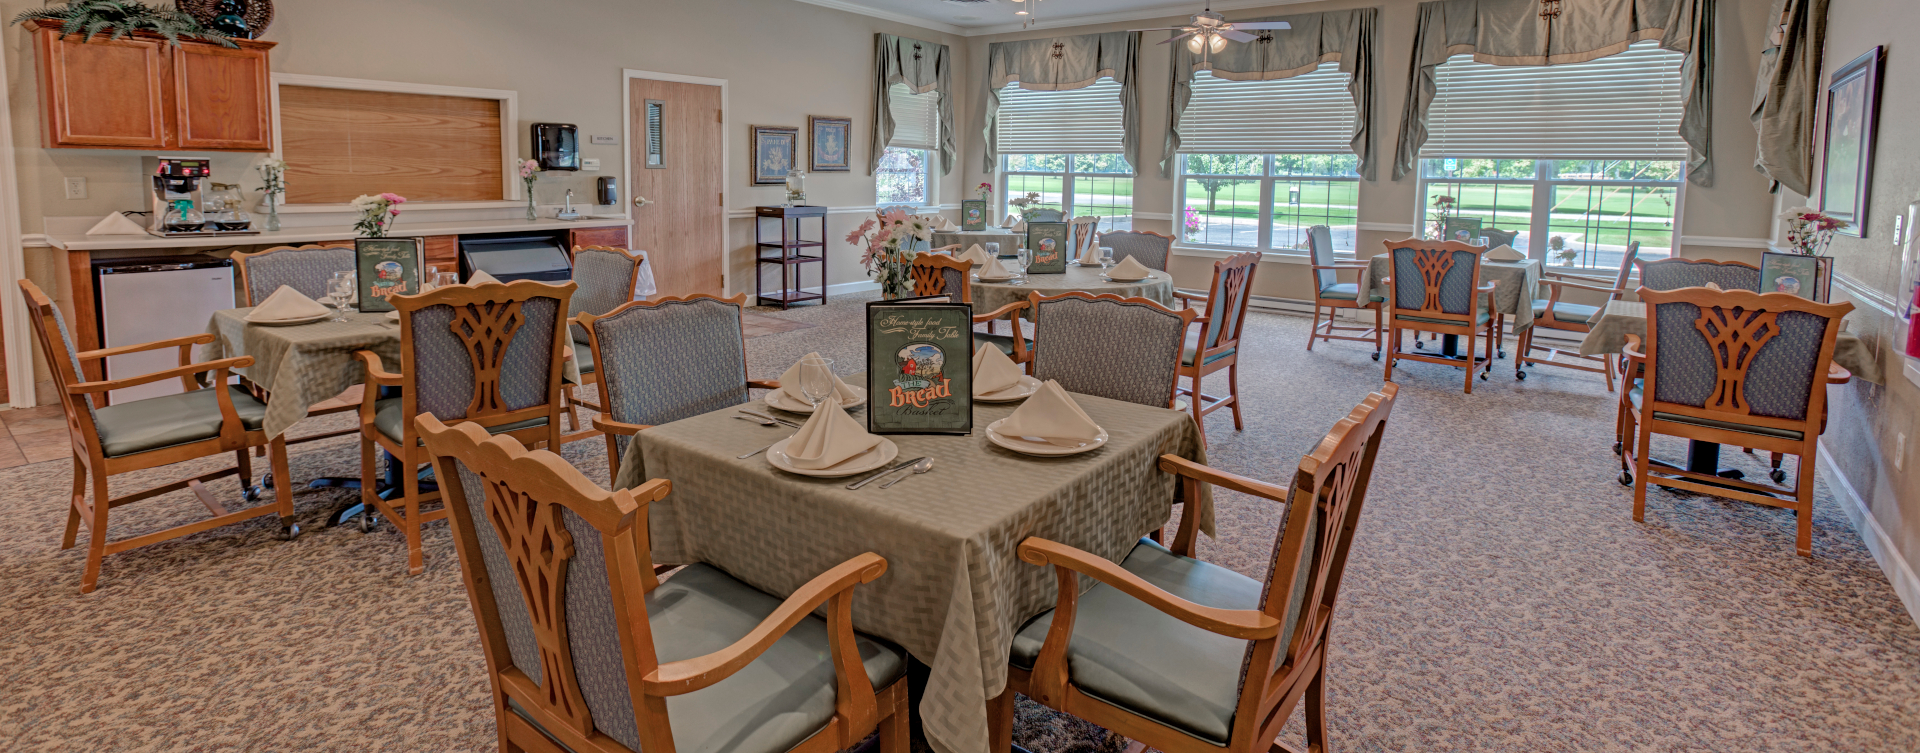 Enjoy homestyle food with made-from-scratch recipes in our dining room at Bickford of Wabash